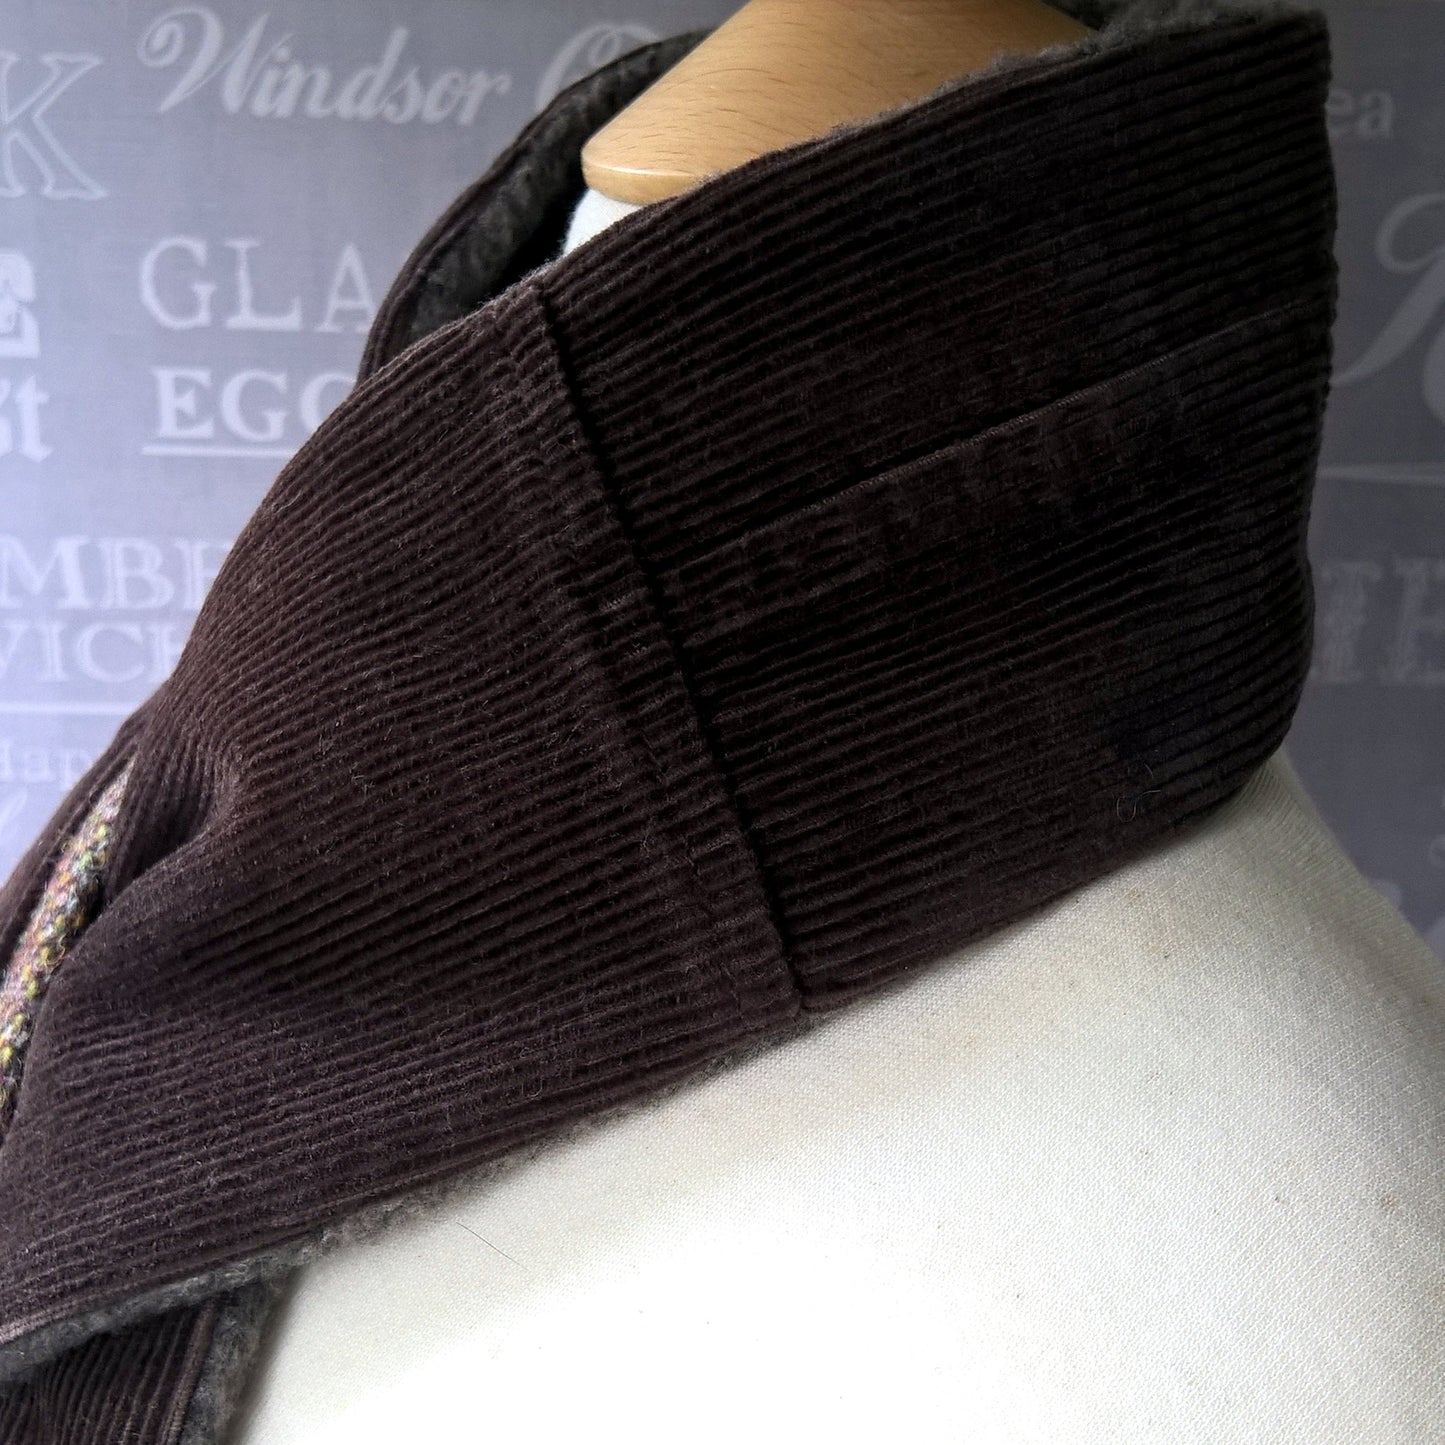 Upcycled brown corduroy neck warmer with marl fleece lining